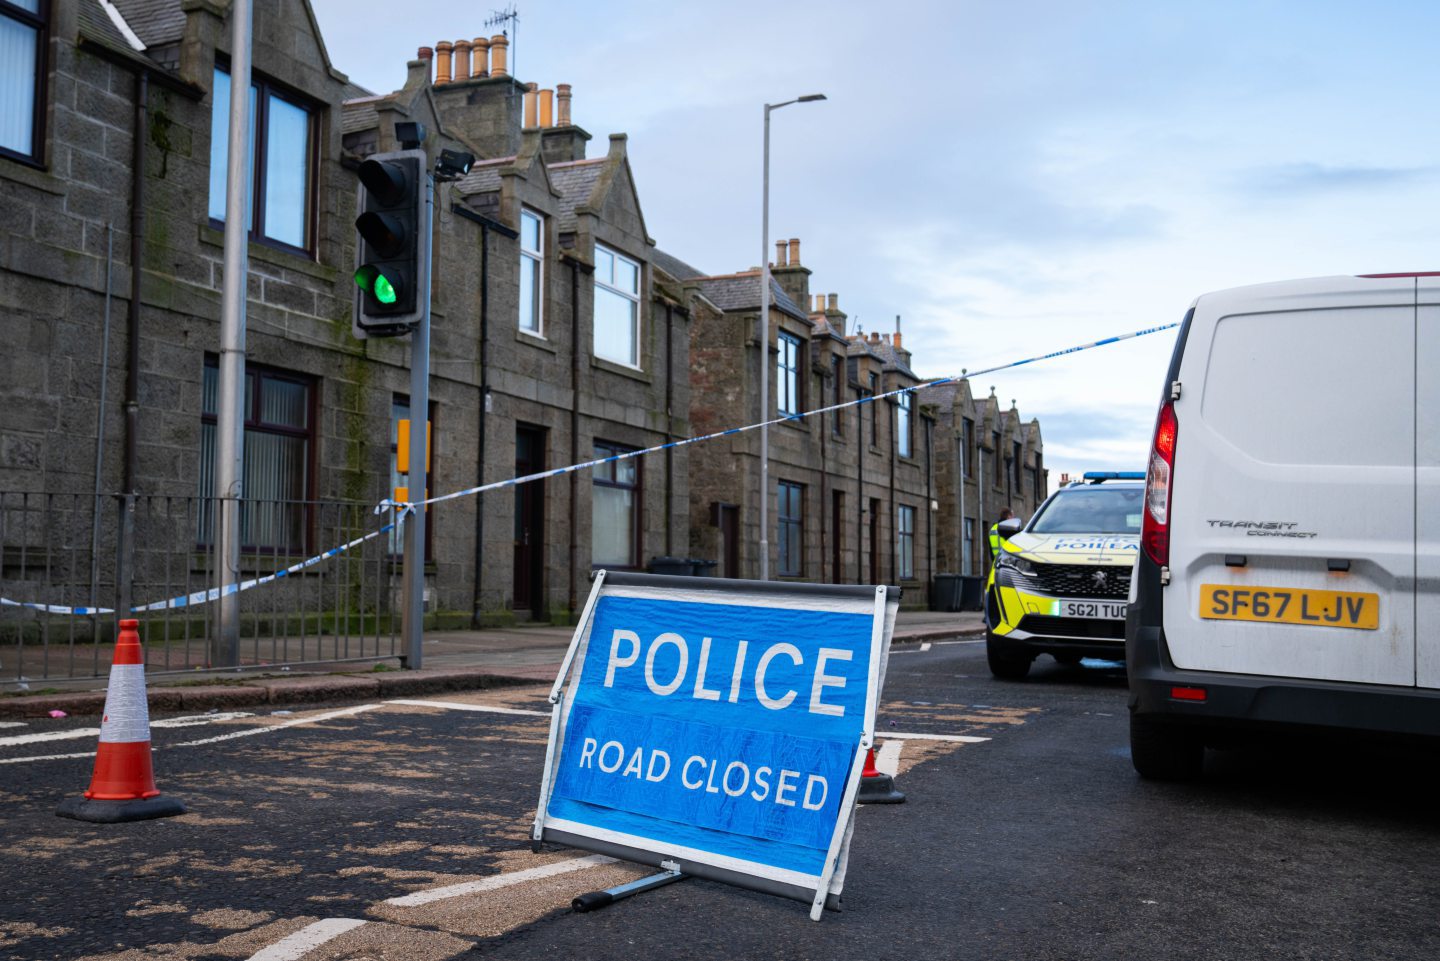 Police car at the scene of the incident in Fraserburgh.